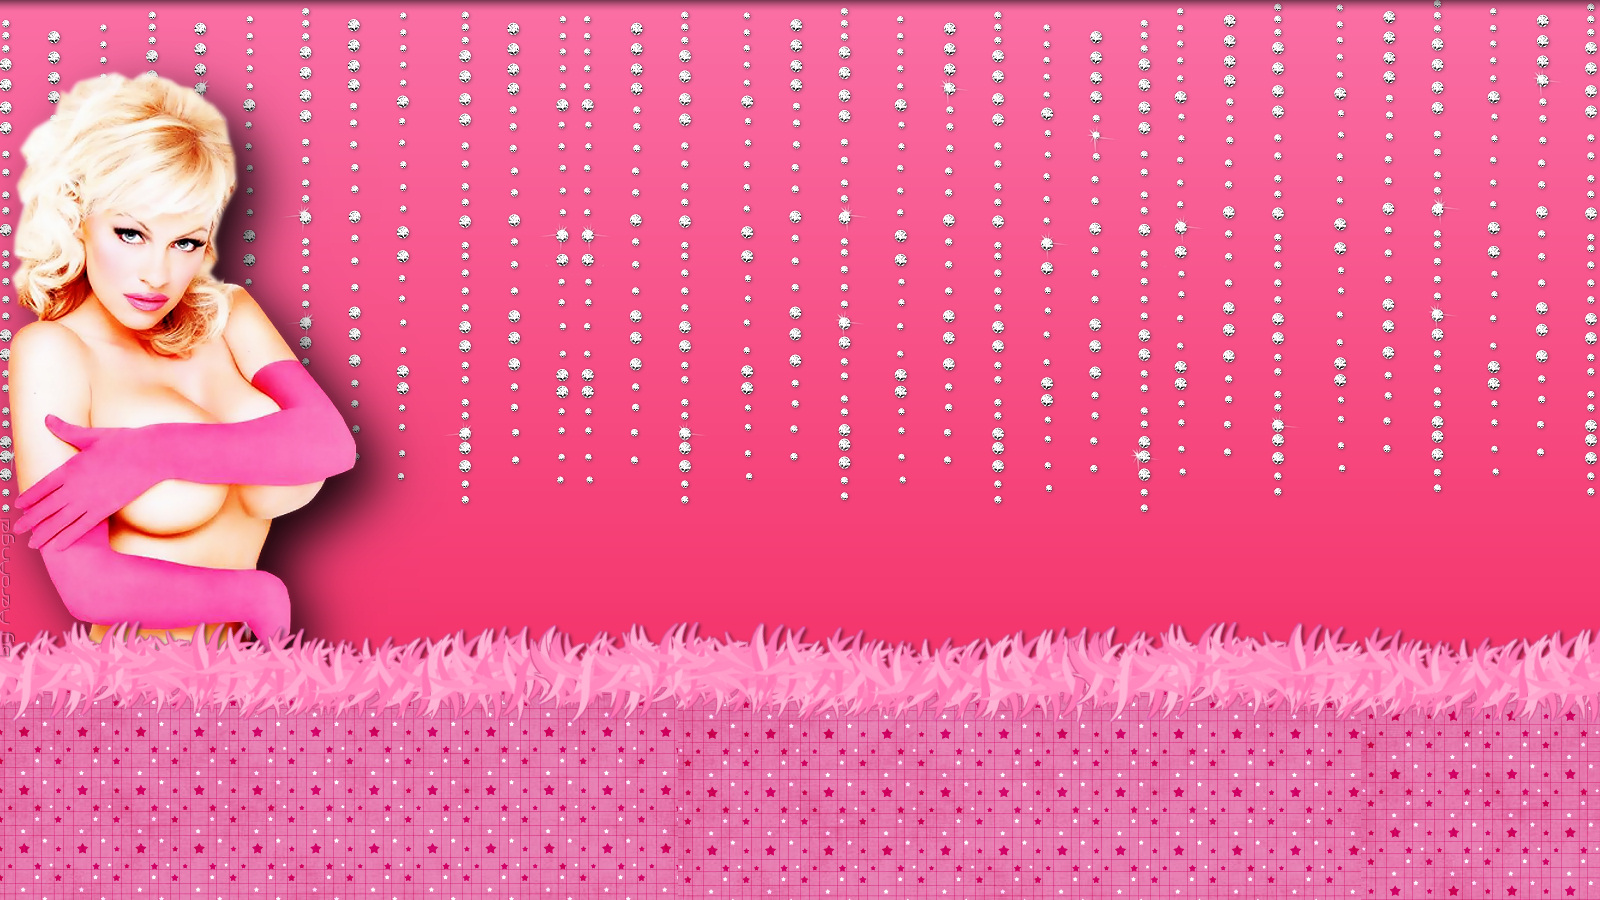 Pretty In Pink Background Pamela Anderson